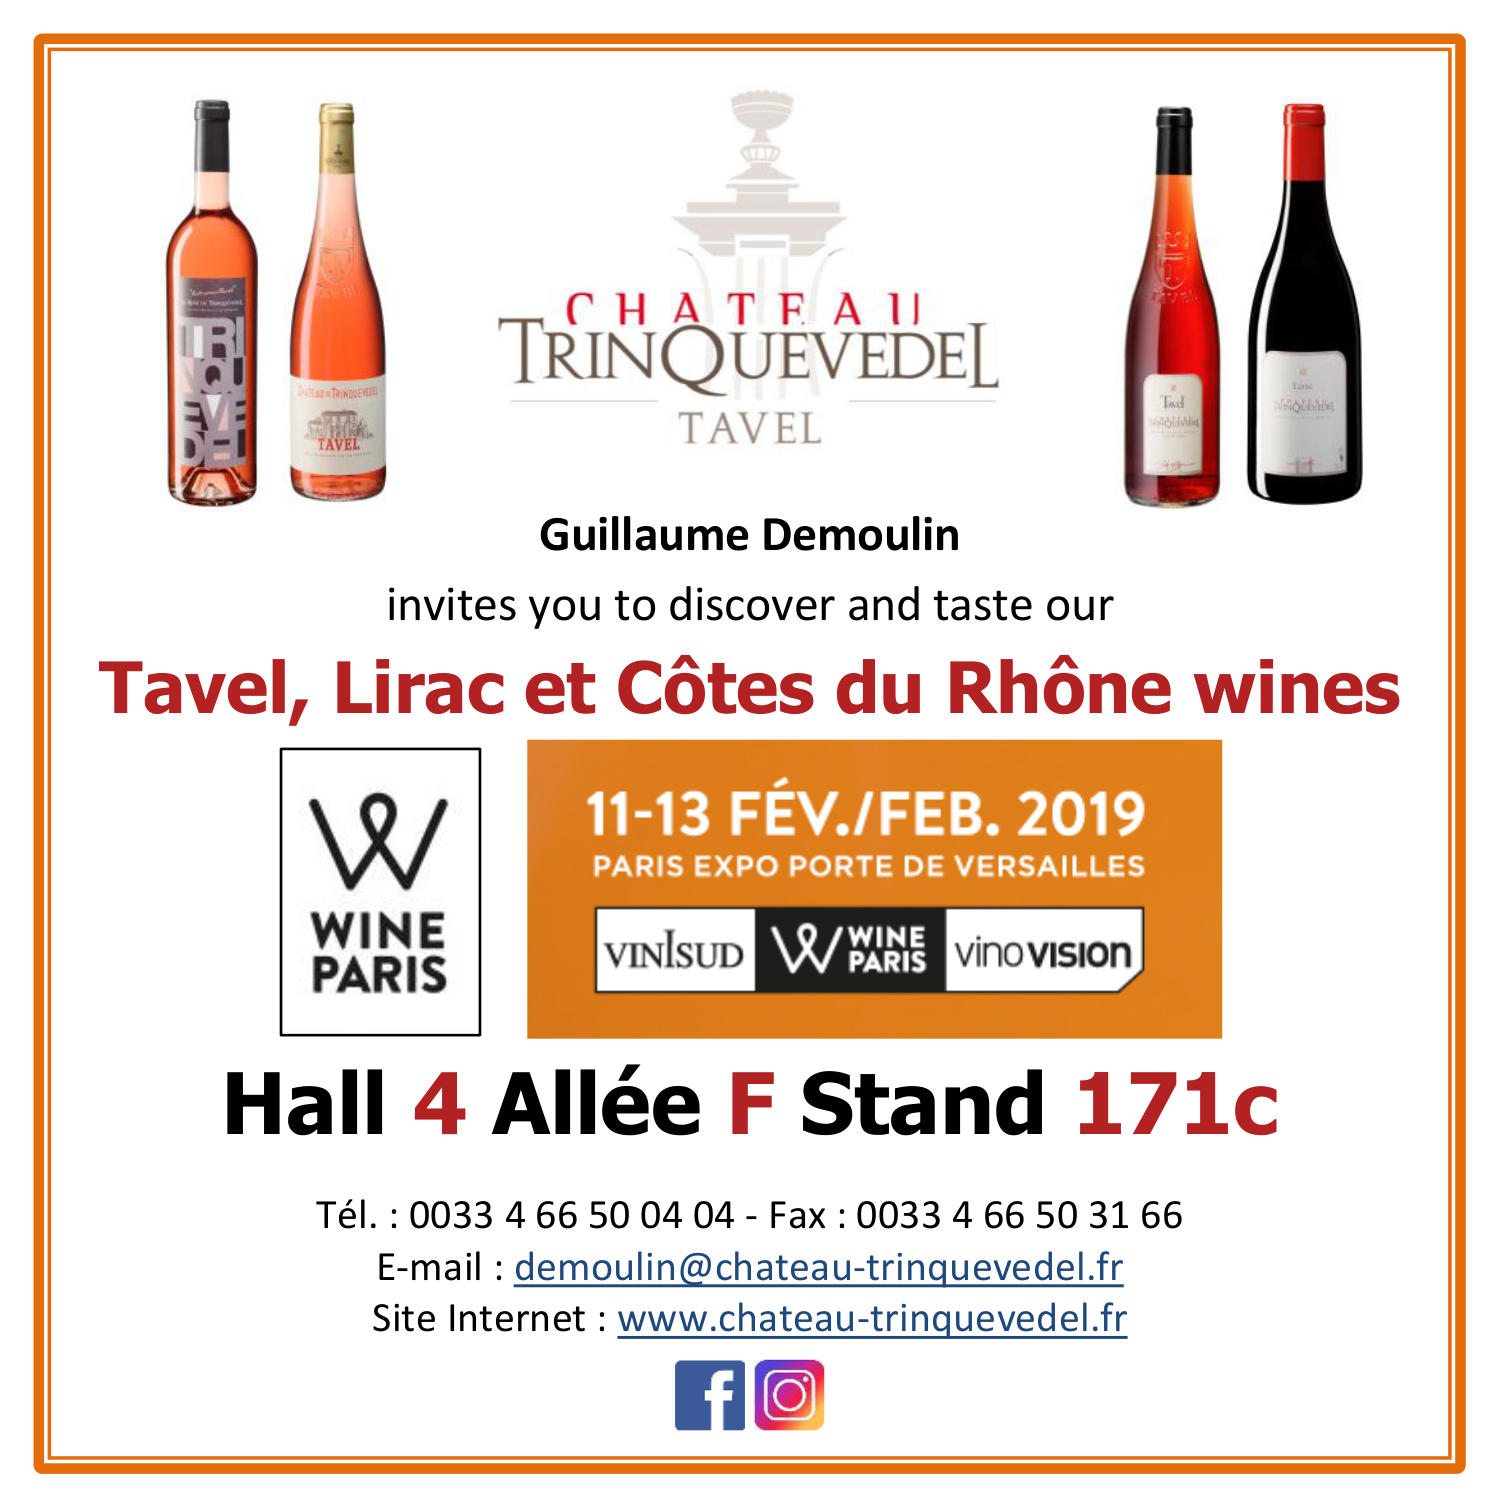 WINE PARIS, We'll be there : Hall 4 Allée F Stand 171c